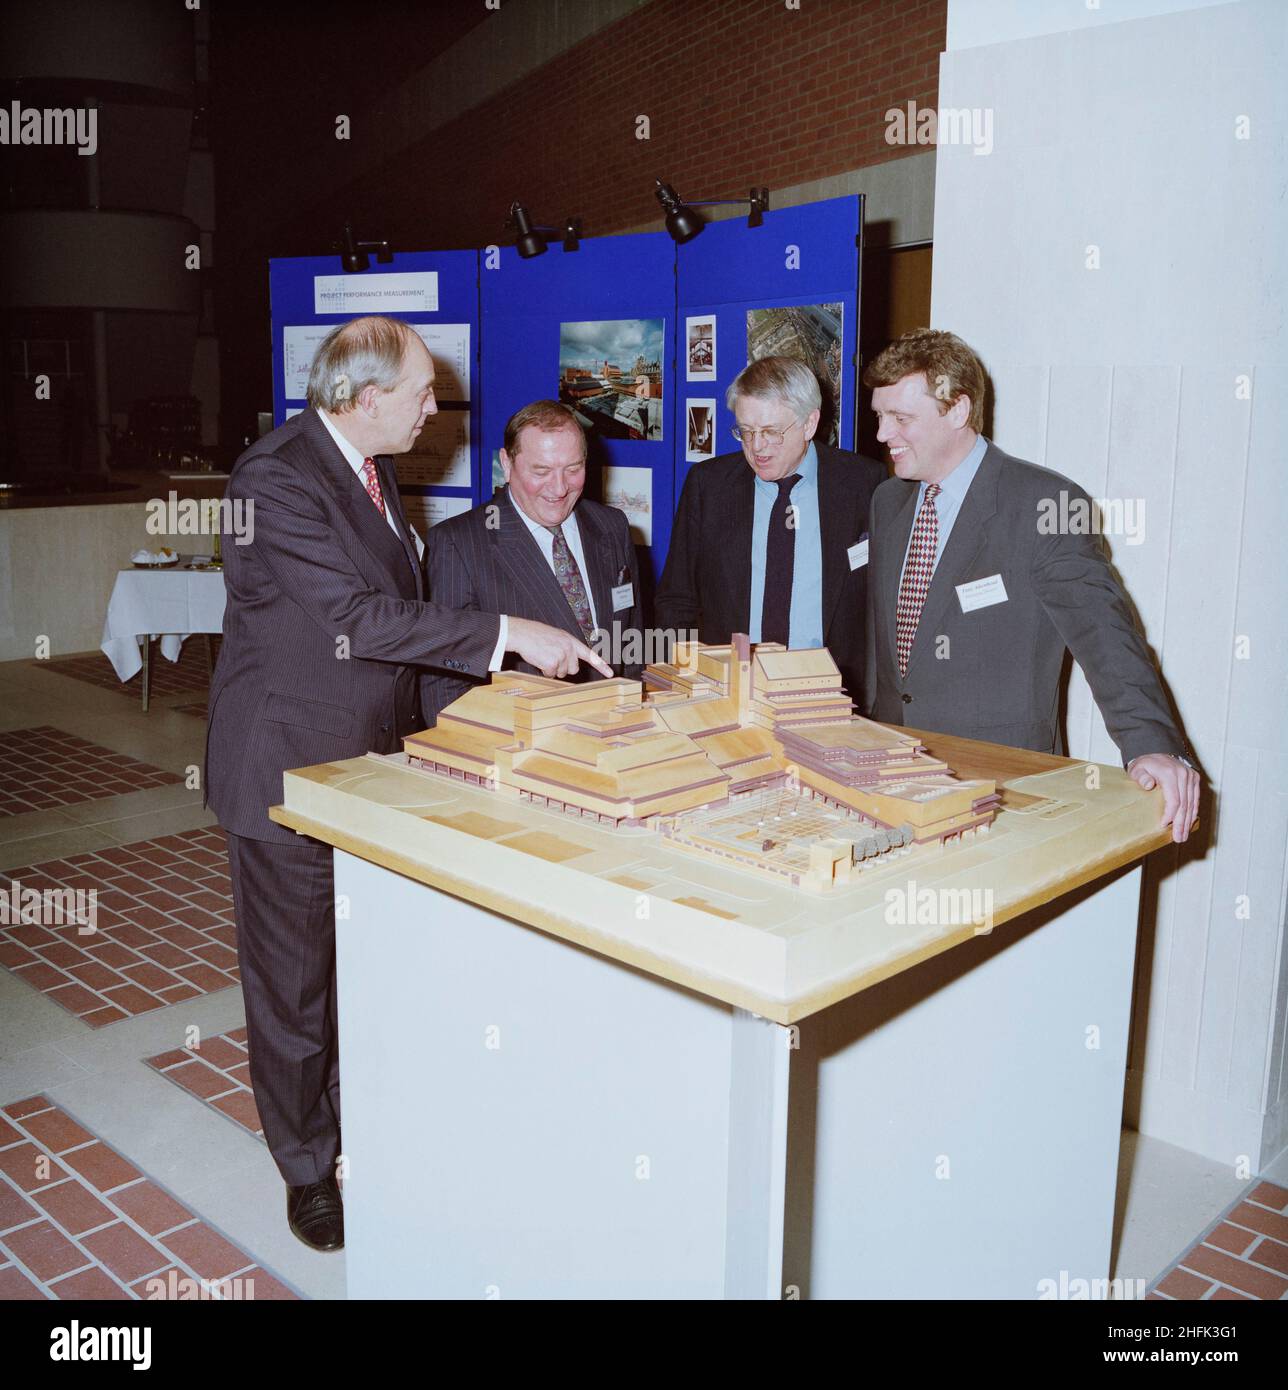 British Library, Euston Road, St Pancras, Camden, London, 06/03/1996. The British Library's architect, Colin St John Wilson and Laing dignitaries admire a scale model of the building at a reception to celebrate its completion. Those pictured are Martin Laing, Laing Group Chairman, Peter Gregory, Chairman of Laing Management and Tony Atkinhead, Managing Director of Laing Management. The British Library as an entity was established in 1973 by an act of parliament bringing together various disparate elements including the collections of the British Museum Library, the National Sound Archive and t Stock Photo